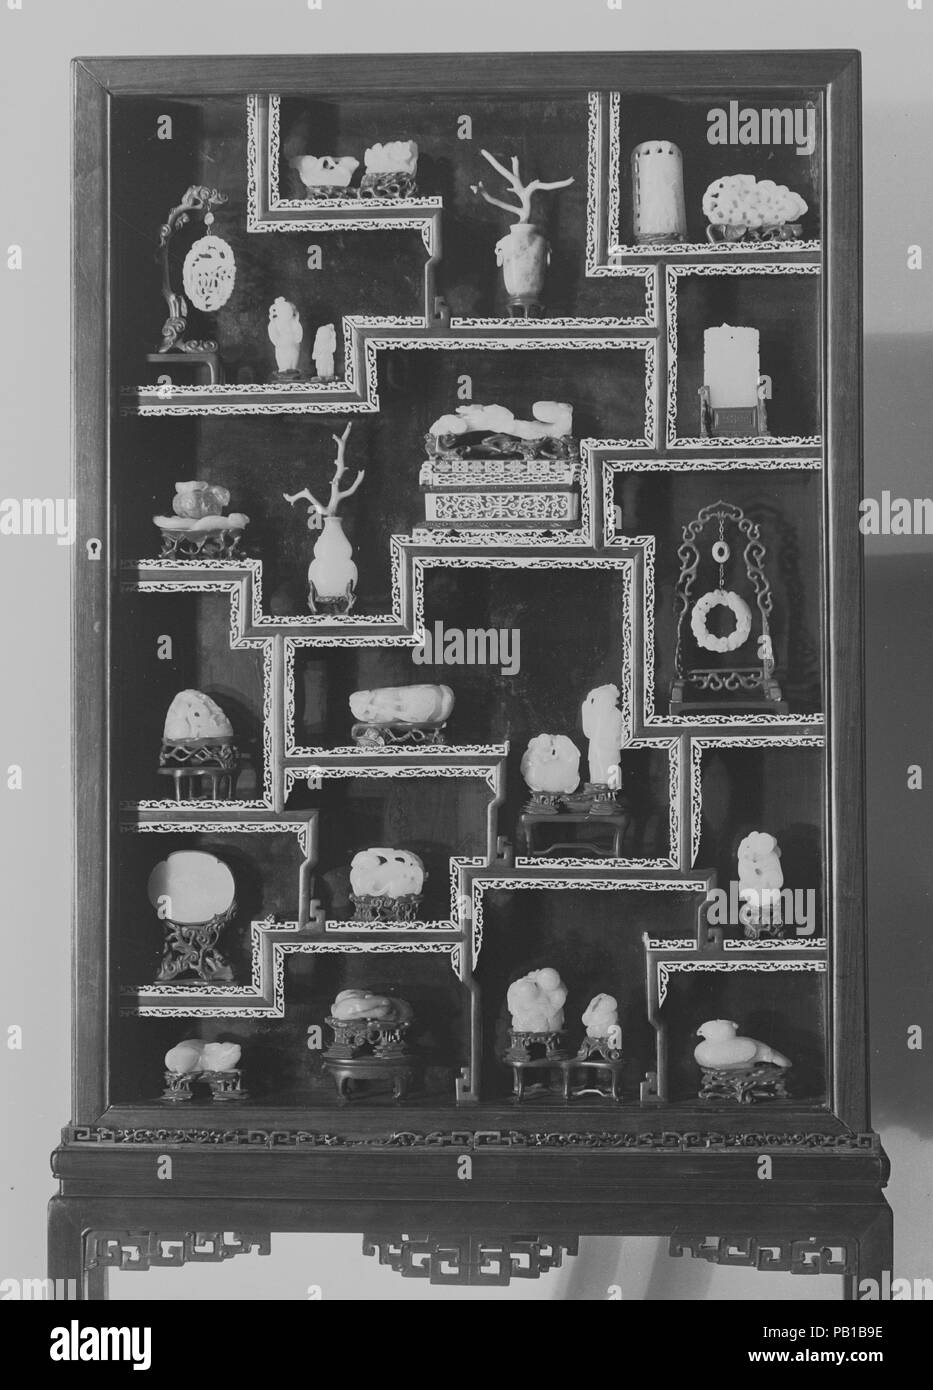 Vitrine Containing Twenty-Five Ornaments. Culture: China. Dimensions: a. Bird pendant: H. 2 in. (5.1 cm); W. 1 3/4 in. (4.4 cm)  b. Standing man: H. 2 in. (5.1 cm)  c. Standing man: H. 1 3/8 in. (3.5 cm)  d. Flower and leaf: H. 1 in. (2.5 cm); L. 1 1/8 in. (2.9 cm)  e. Floral buncH. H. 1 1/8 in. (2.9 cm); Diam. 1 1/2 in. (3.8 cm)  f. Vase with coral spray: H. 1 7/8 in. (4.8 cm), (vase)  g. Tree and bird: H. 3 5/8 in. (9.2 cm)  h. 2 small animals: H. 1 3/8 in. (3.5 cm); L. 2 1/4 in. (5.7 cm)  i. Leaf with lotus of amethyst quartz: H. 1 1/4 in. (3.2 cm)  j. Vase with coral spray:H. 4 3/4 in. (12 Stock Photo